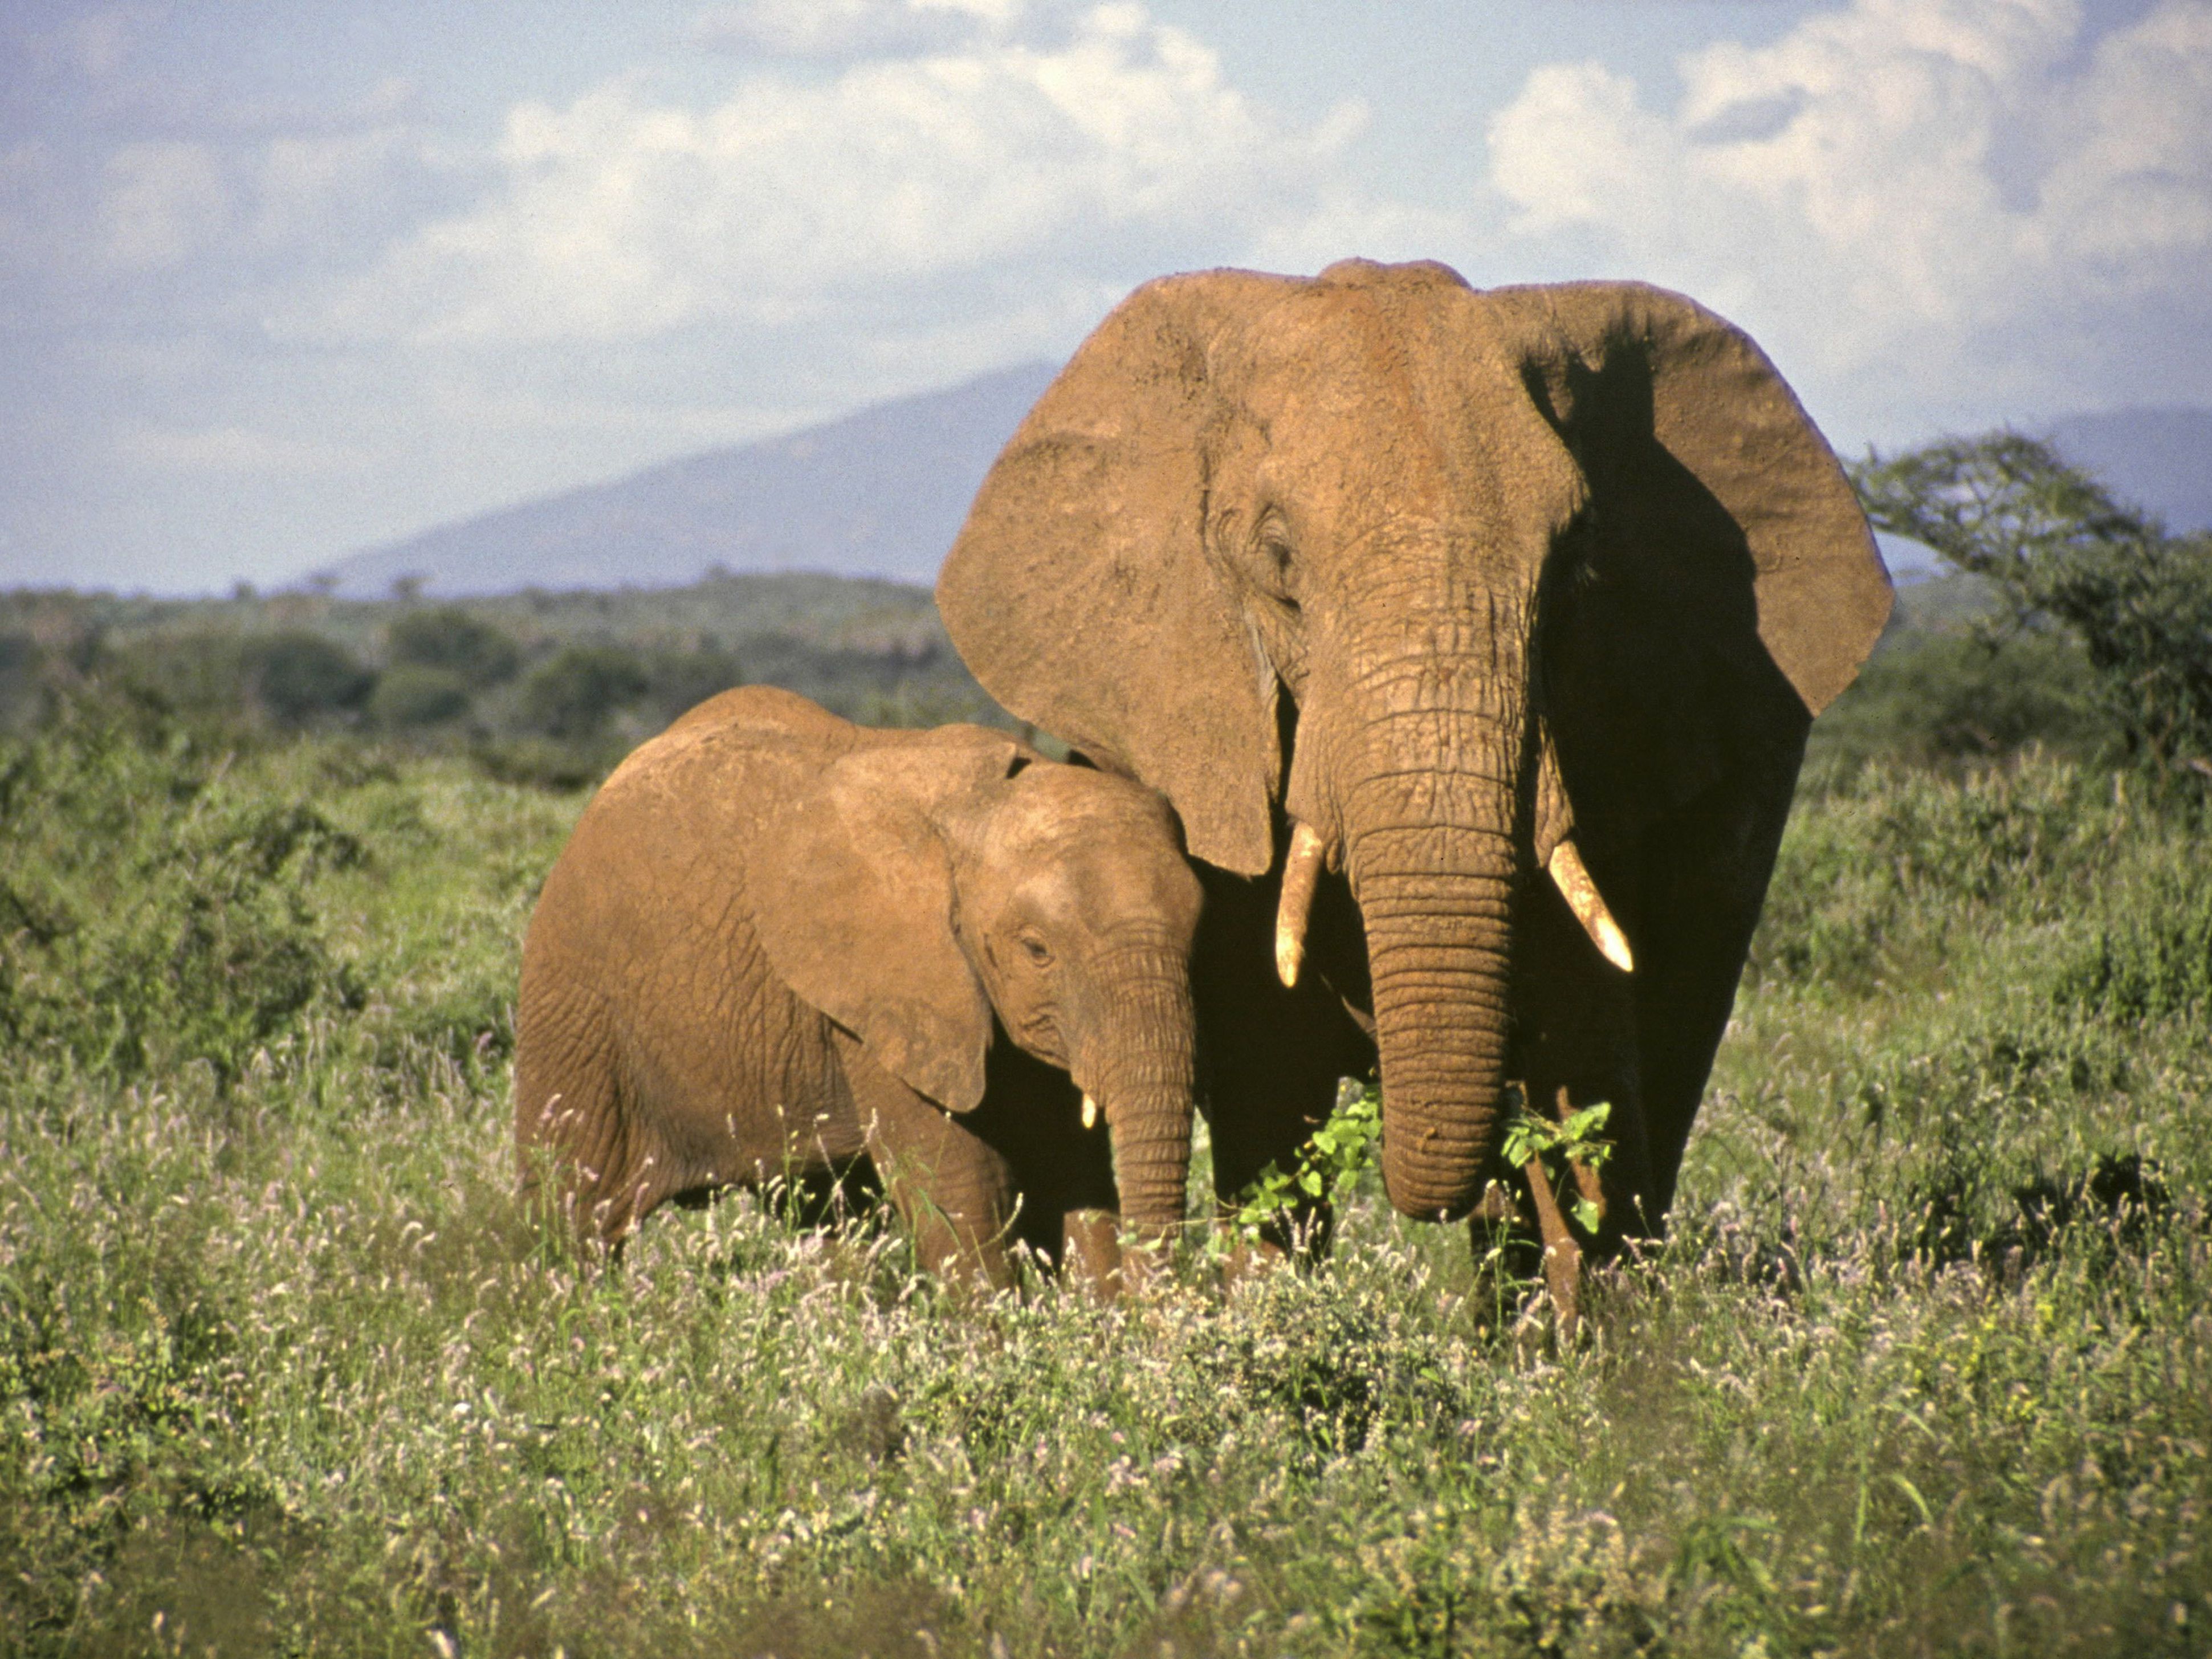 How long do baby elephants stay with their parents?